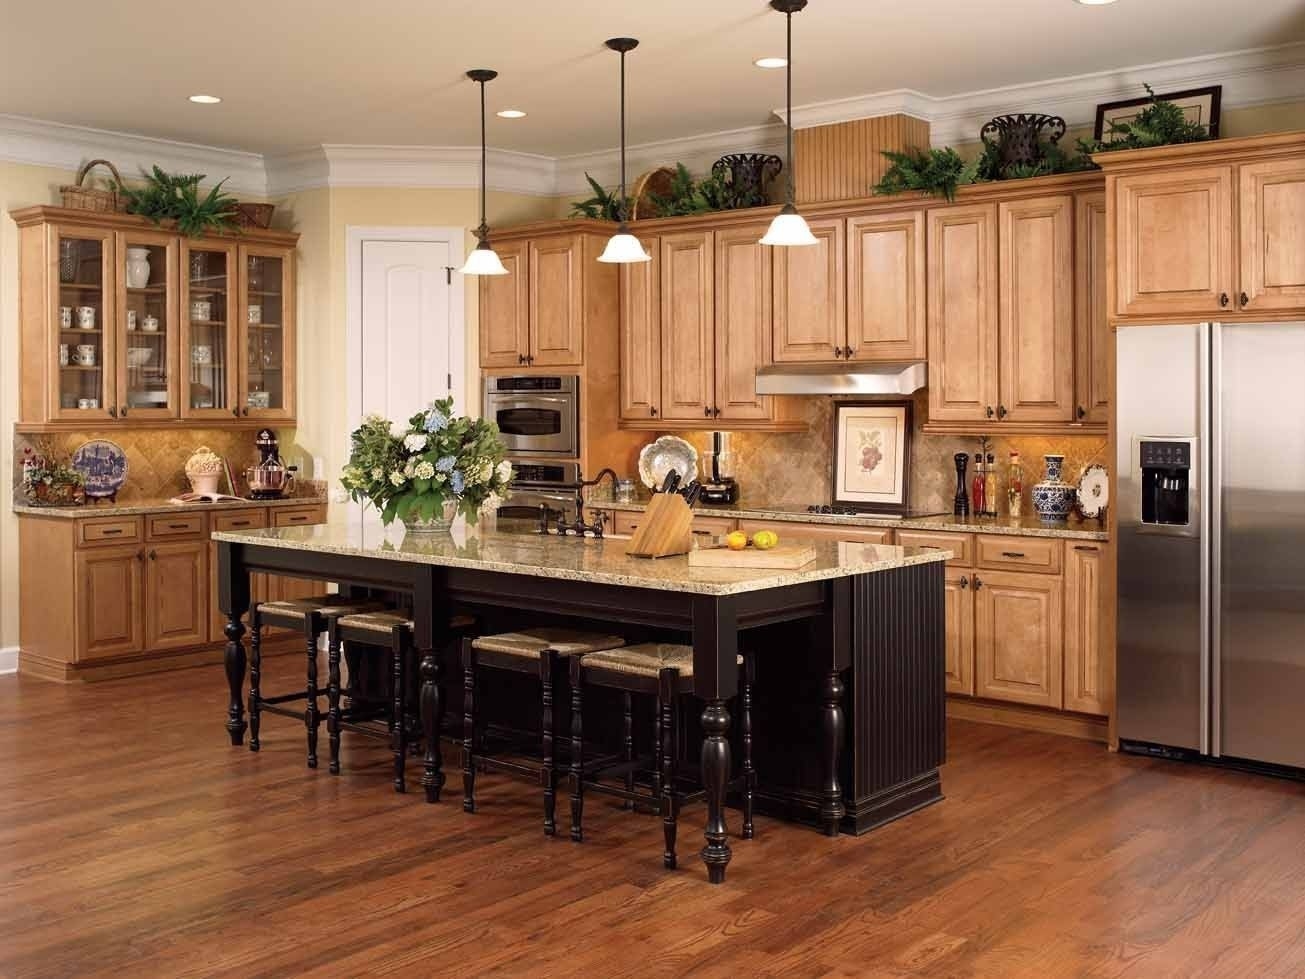 Maple Kitchen Cabinets traditional and transitional styles